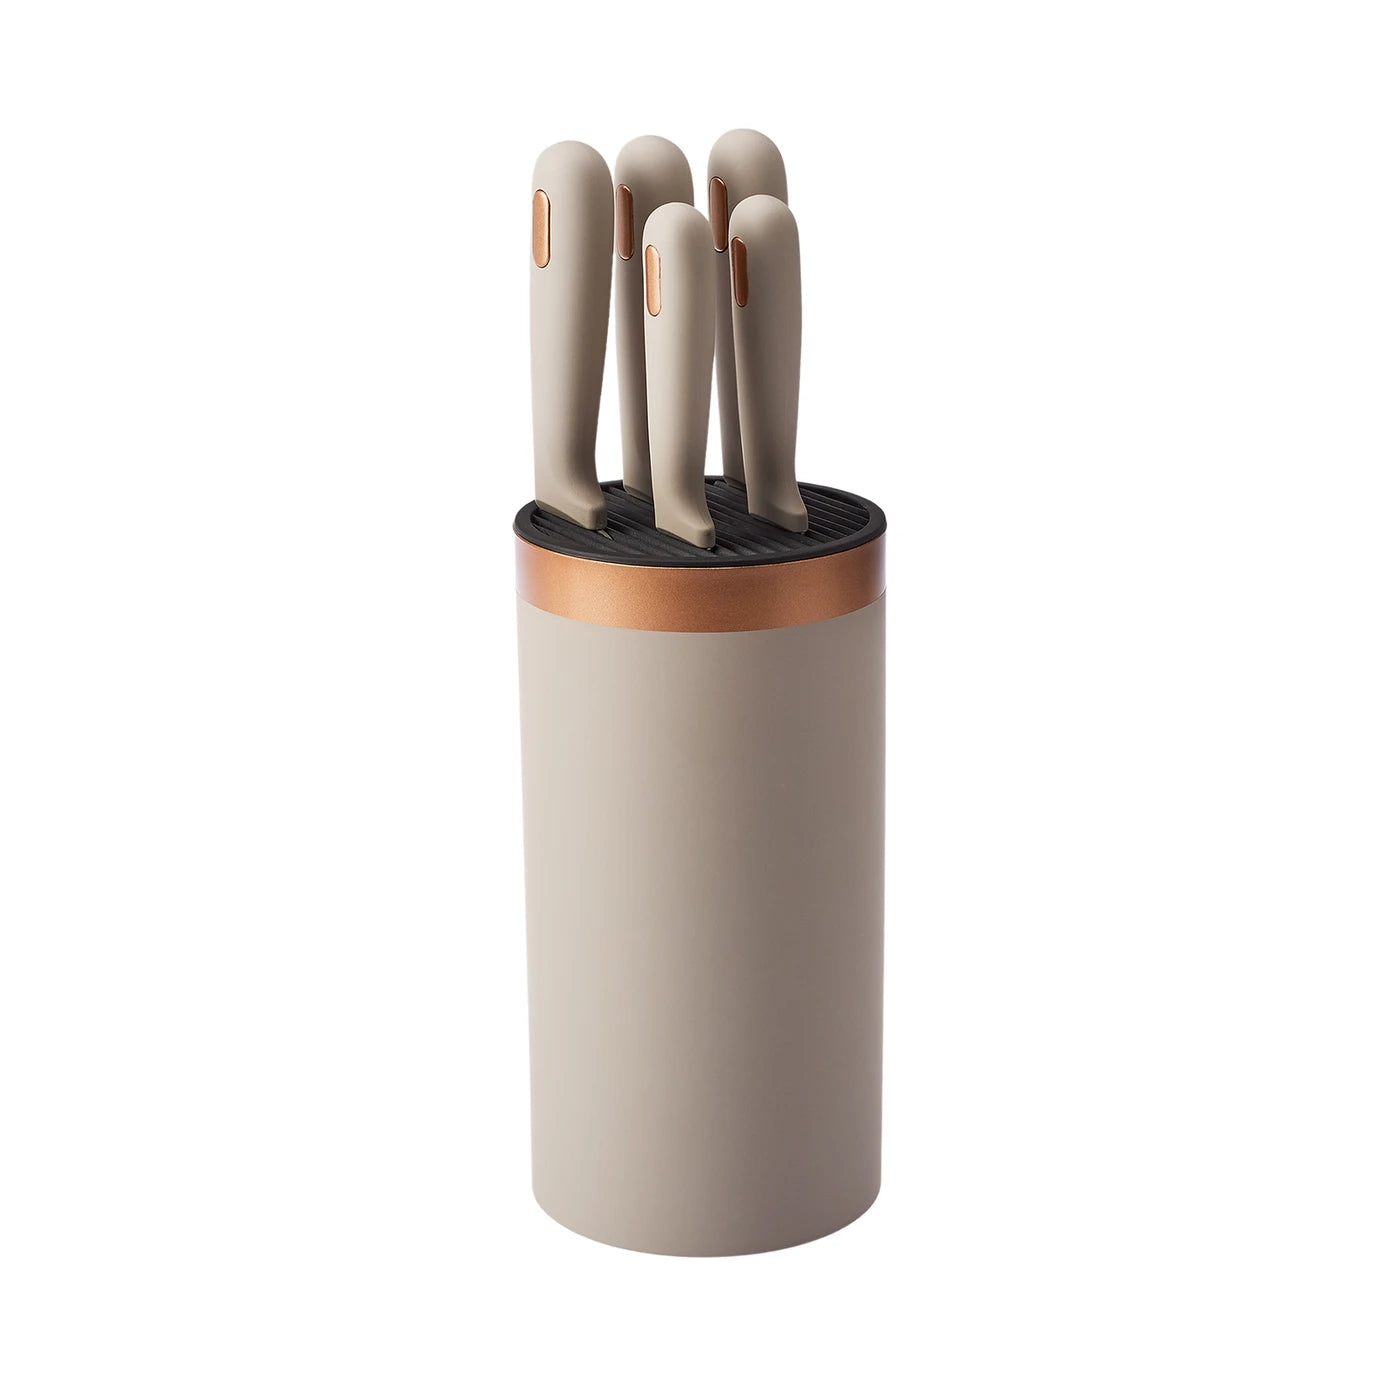 A Knife Set 6 Pieces for Versatile Cooking